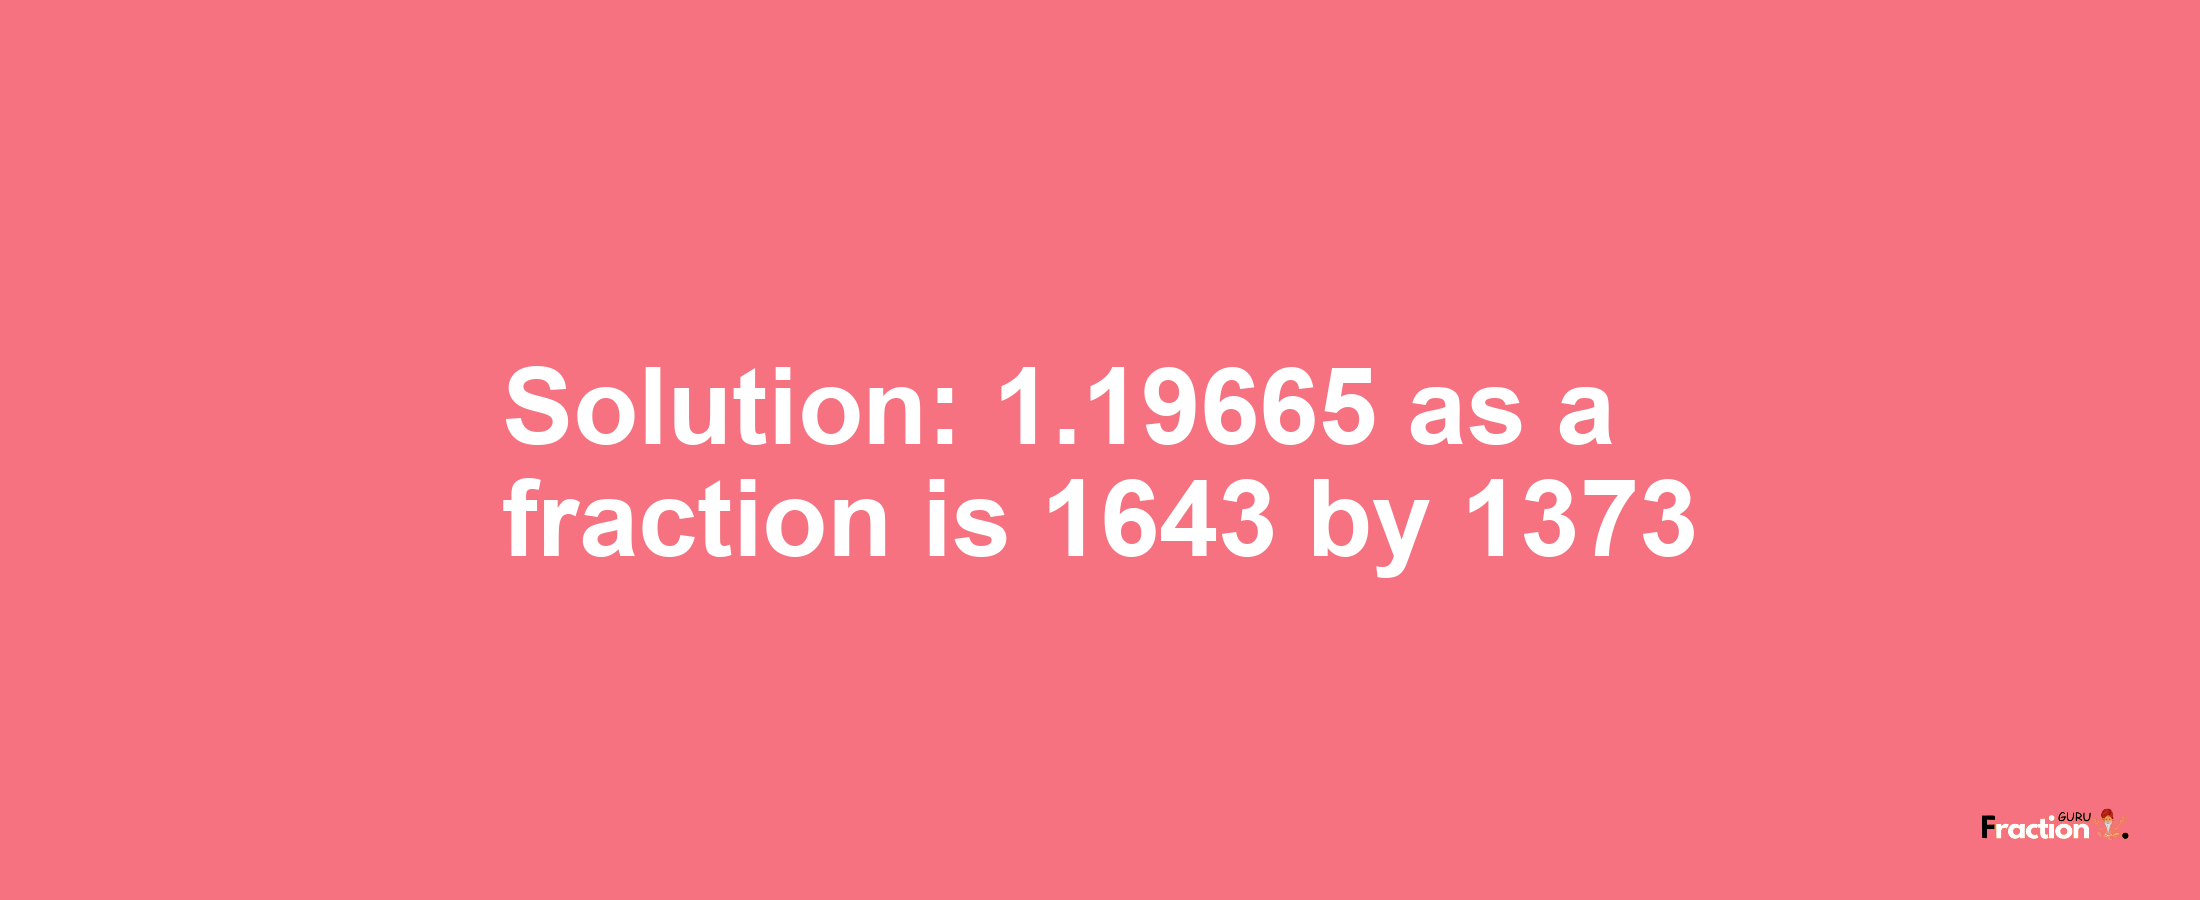 Solution:1.19665 as a fraction is 1643/1373